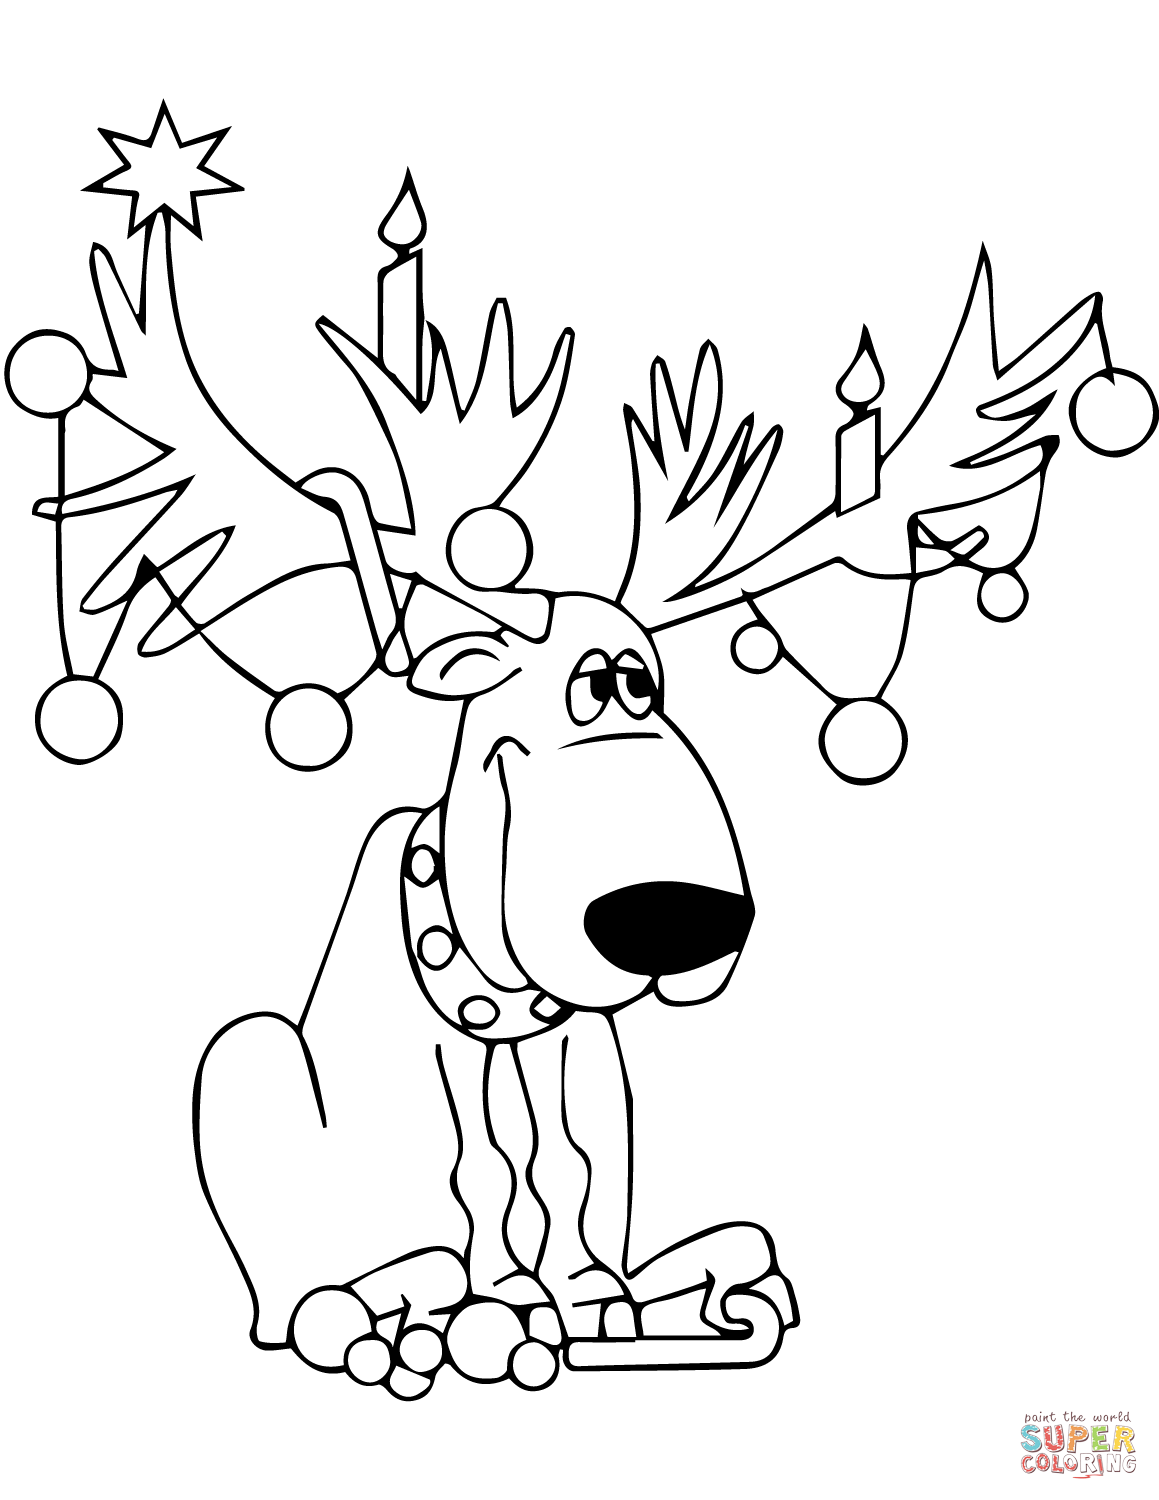 Christmas lights on reindeer antlers coloring page free printable coloring pages